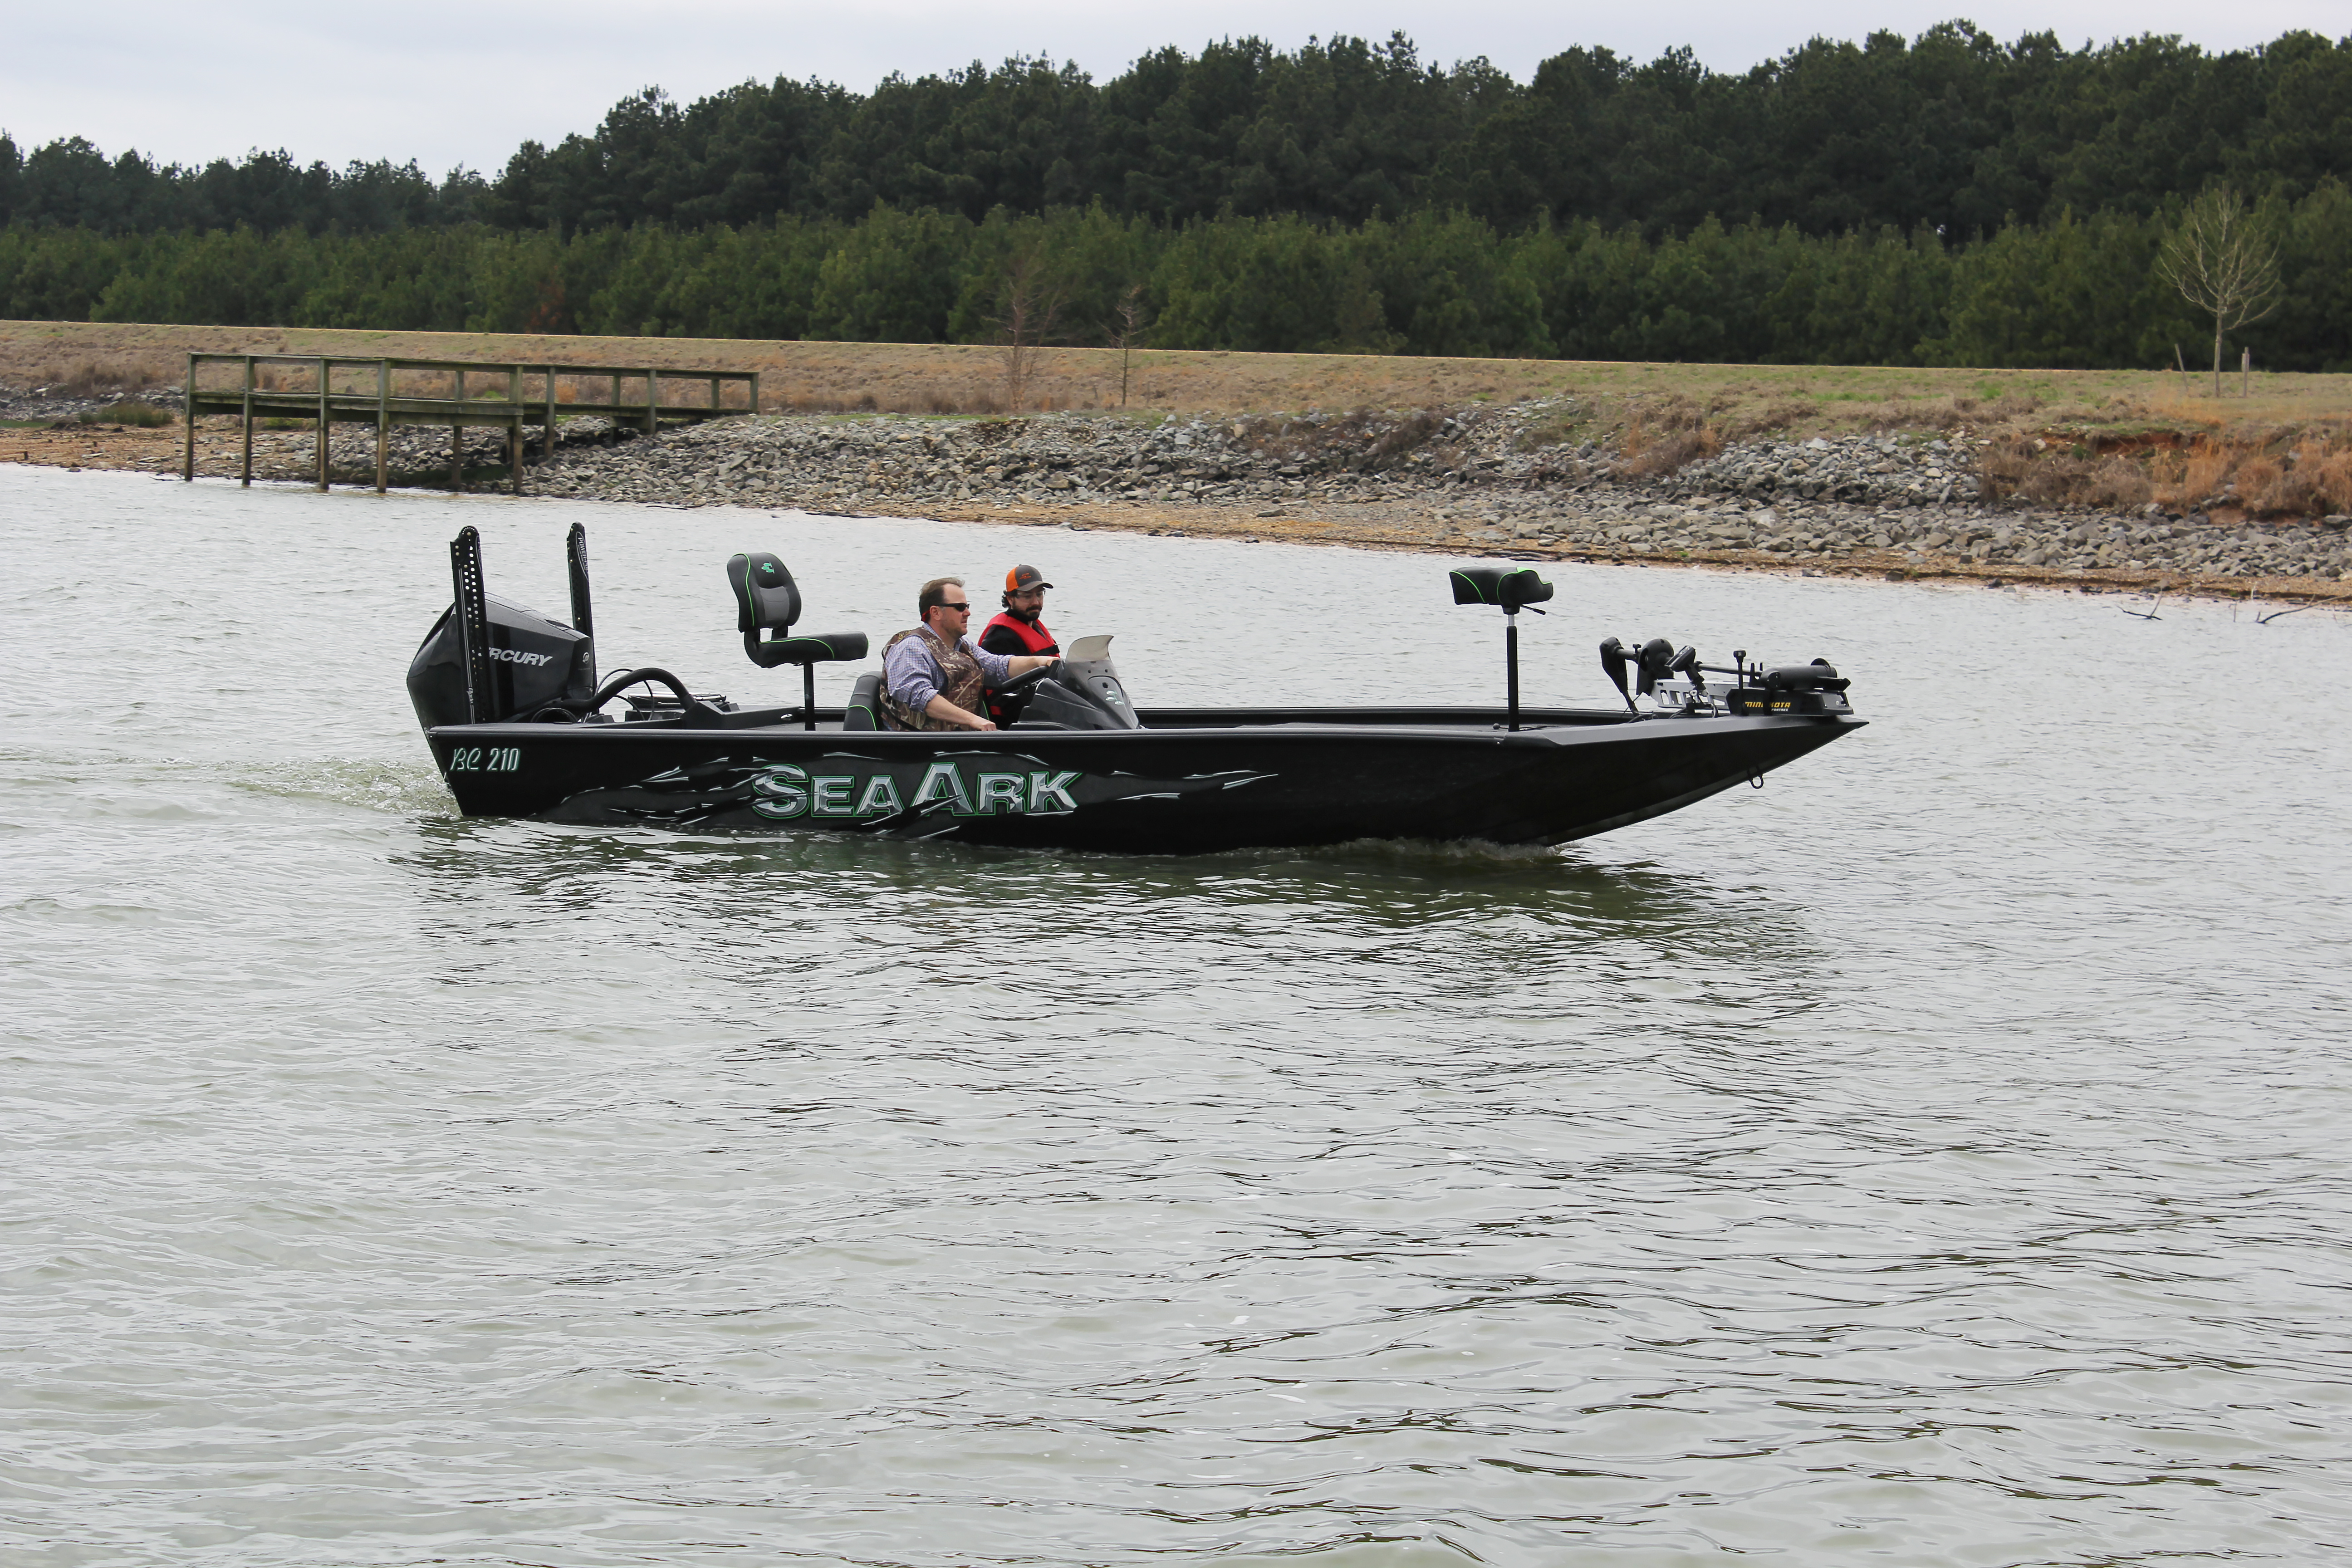 seaark launches new bc 210 model boating industry